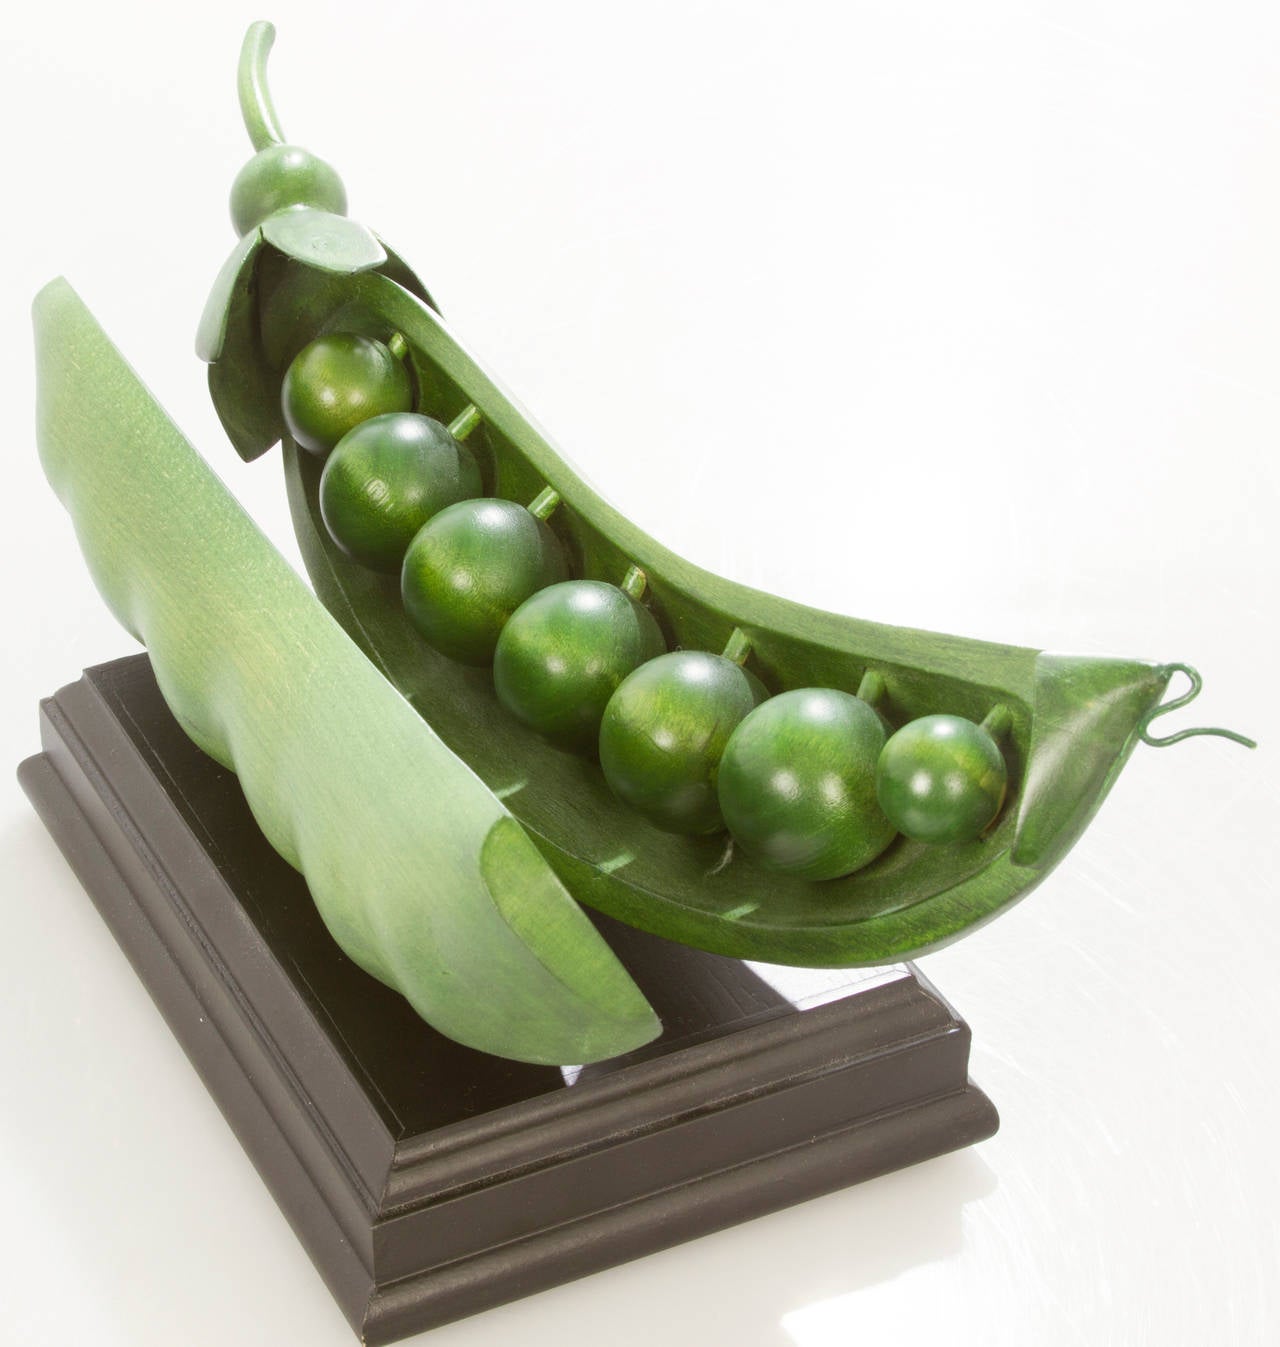 This is wonderfully craved pea pod.